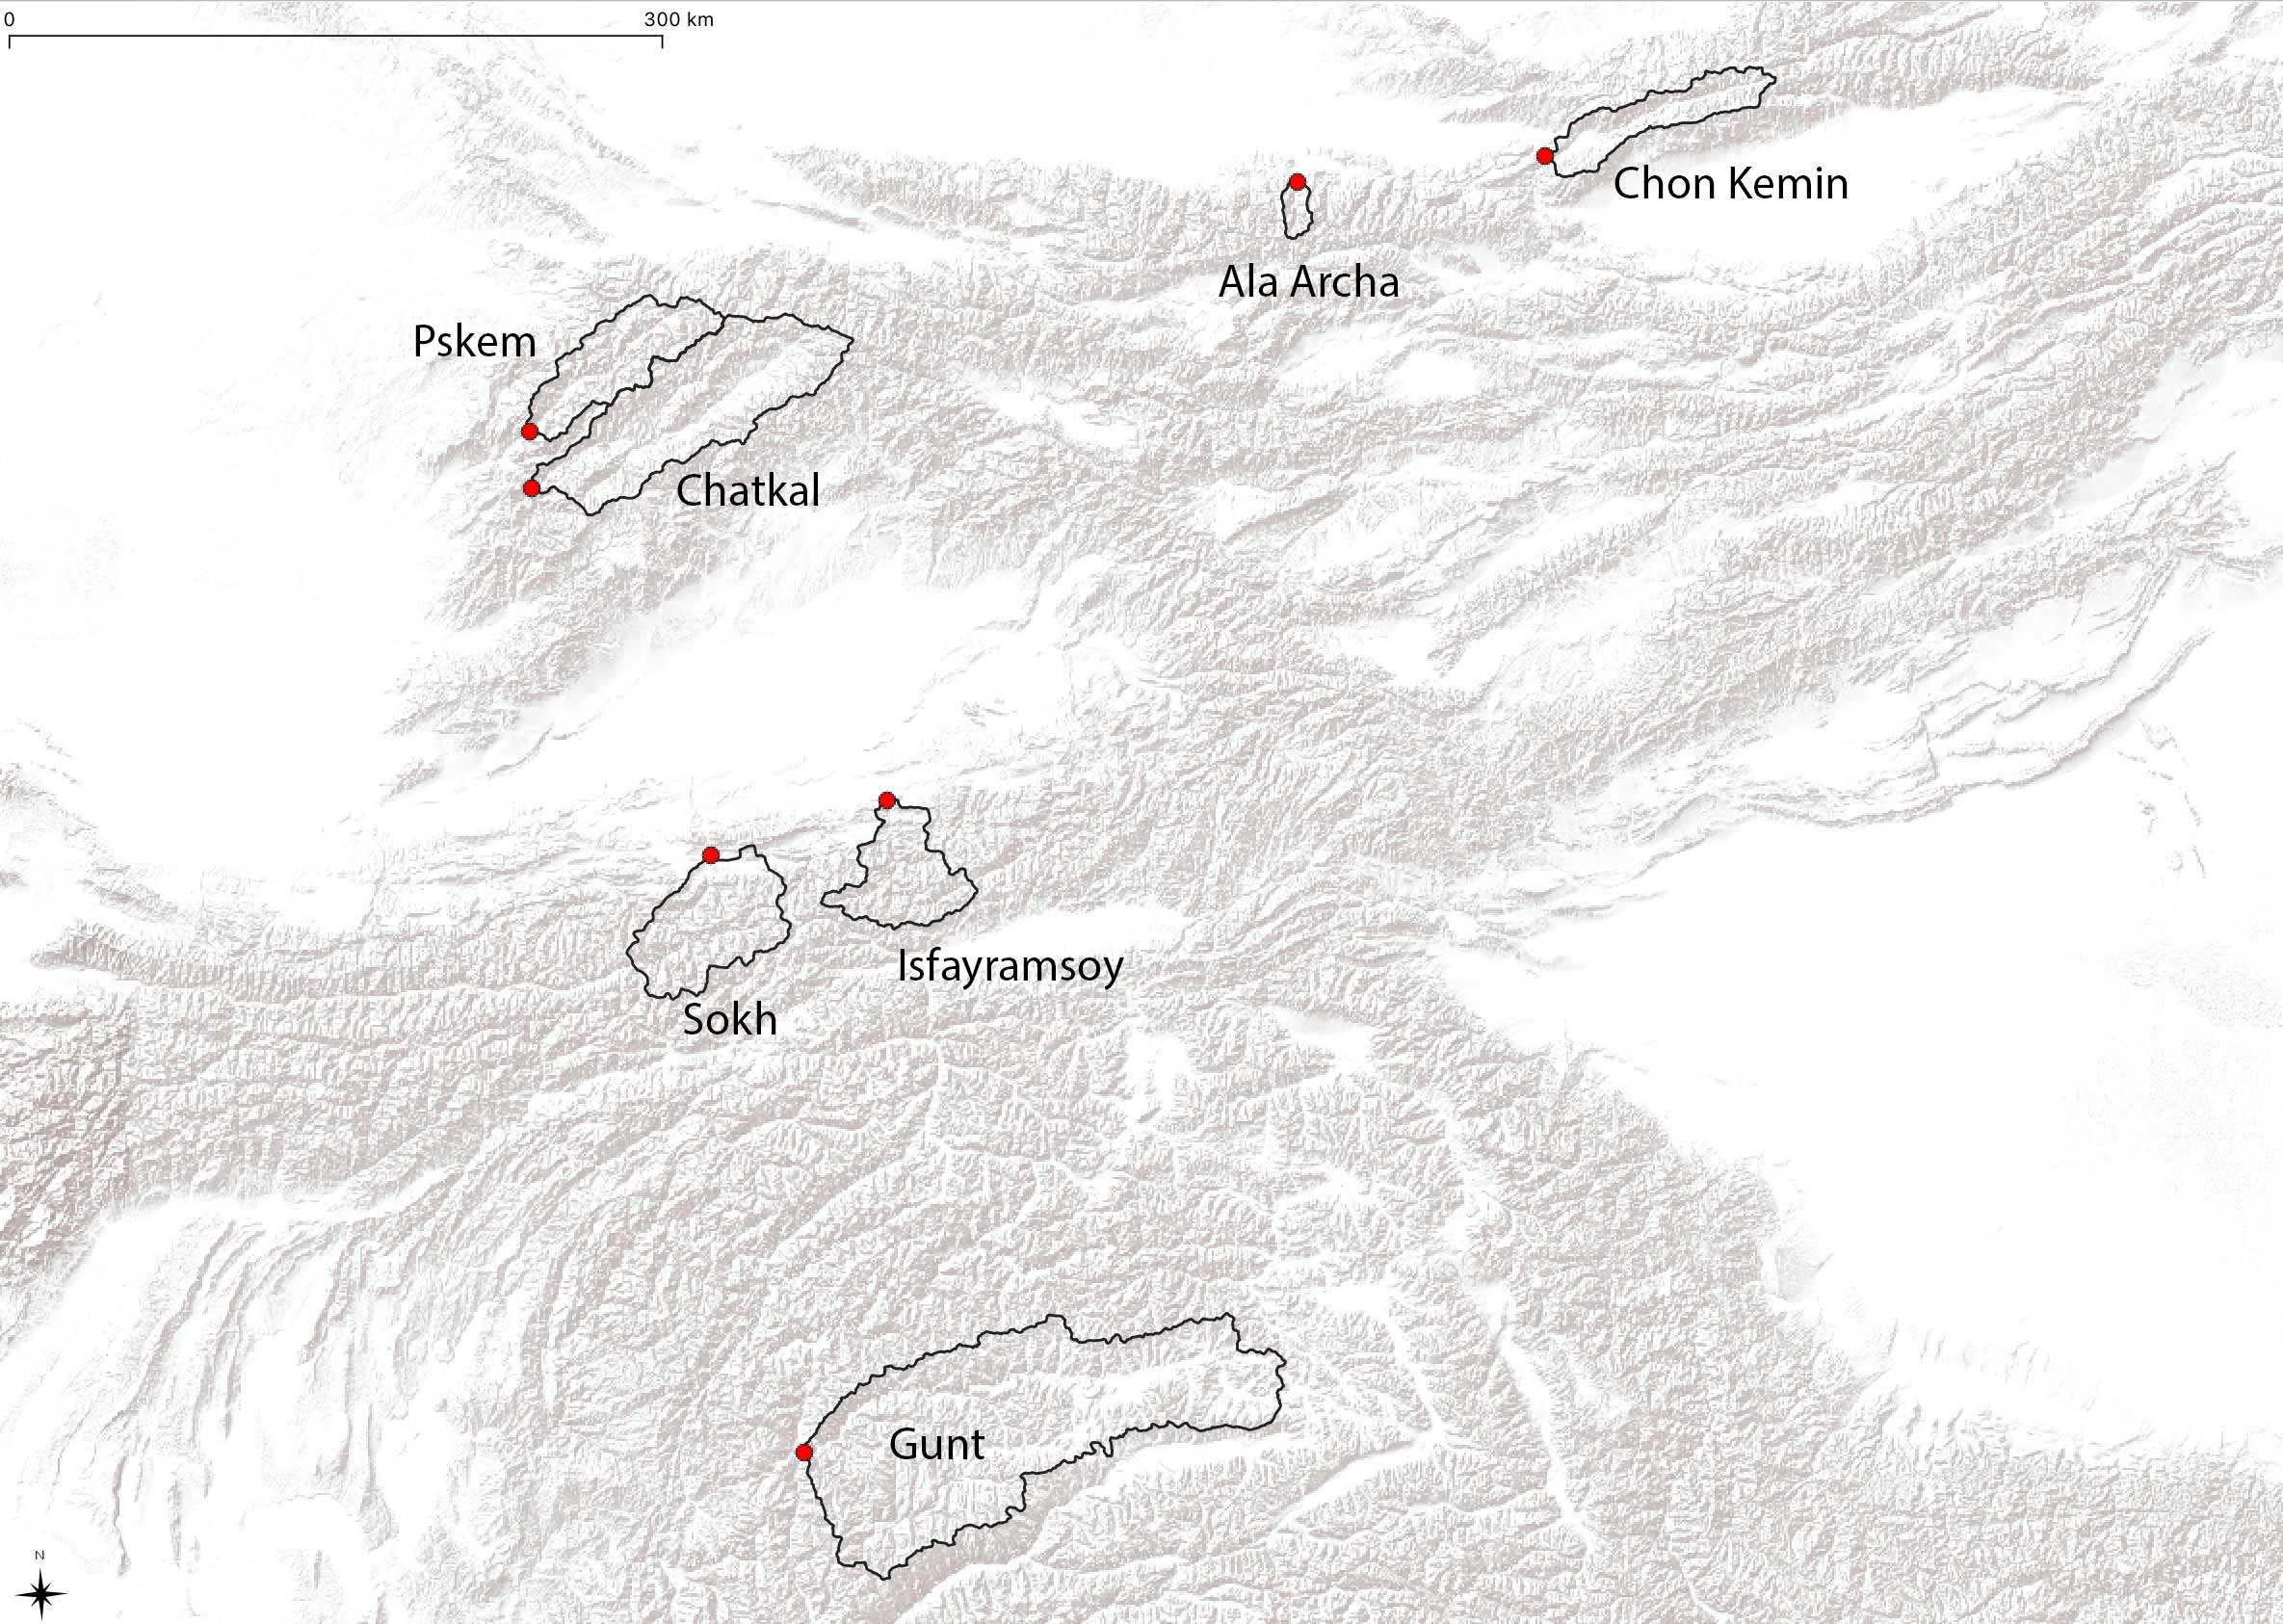 Overview map of the Central Asia region with the 7 study basins. The rivers include the Gunt River in the Amu Darya basin, the Sokh and Isfayramsoy rivers in the Syr Darya basin, the Pskem and Chatkal rivers in the Chirchik river basin and finally, the Ala Archa and Chon Kemin rivers in the Chu river basins. The catchments are delineated with by the black polygons and the location of the individual gauges highlighted with the red circles.